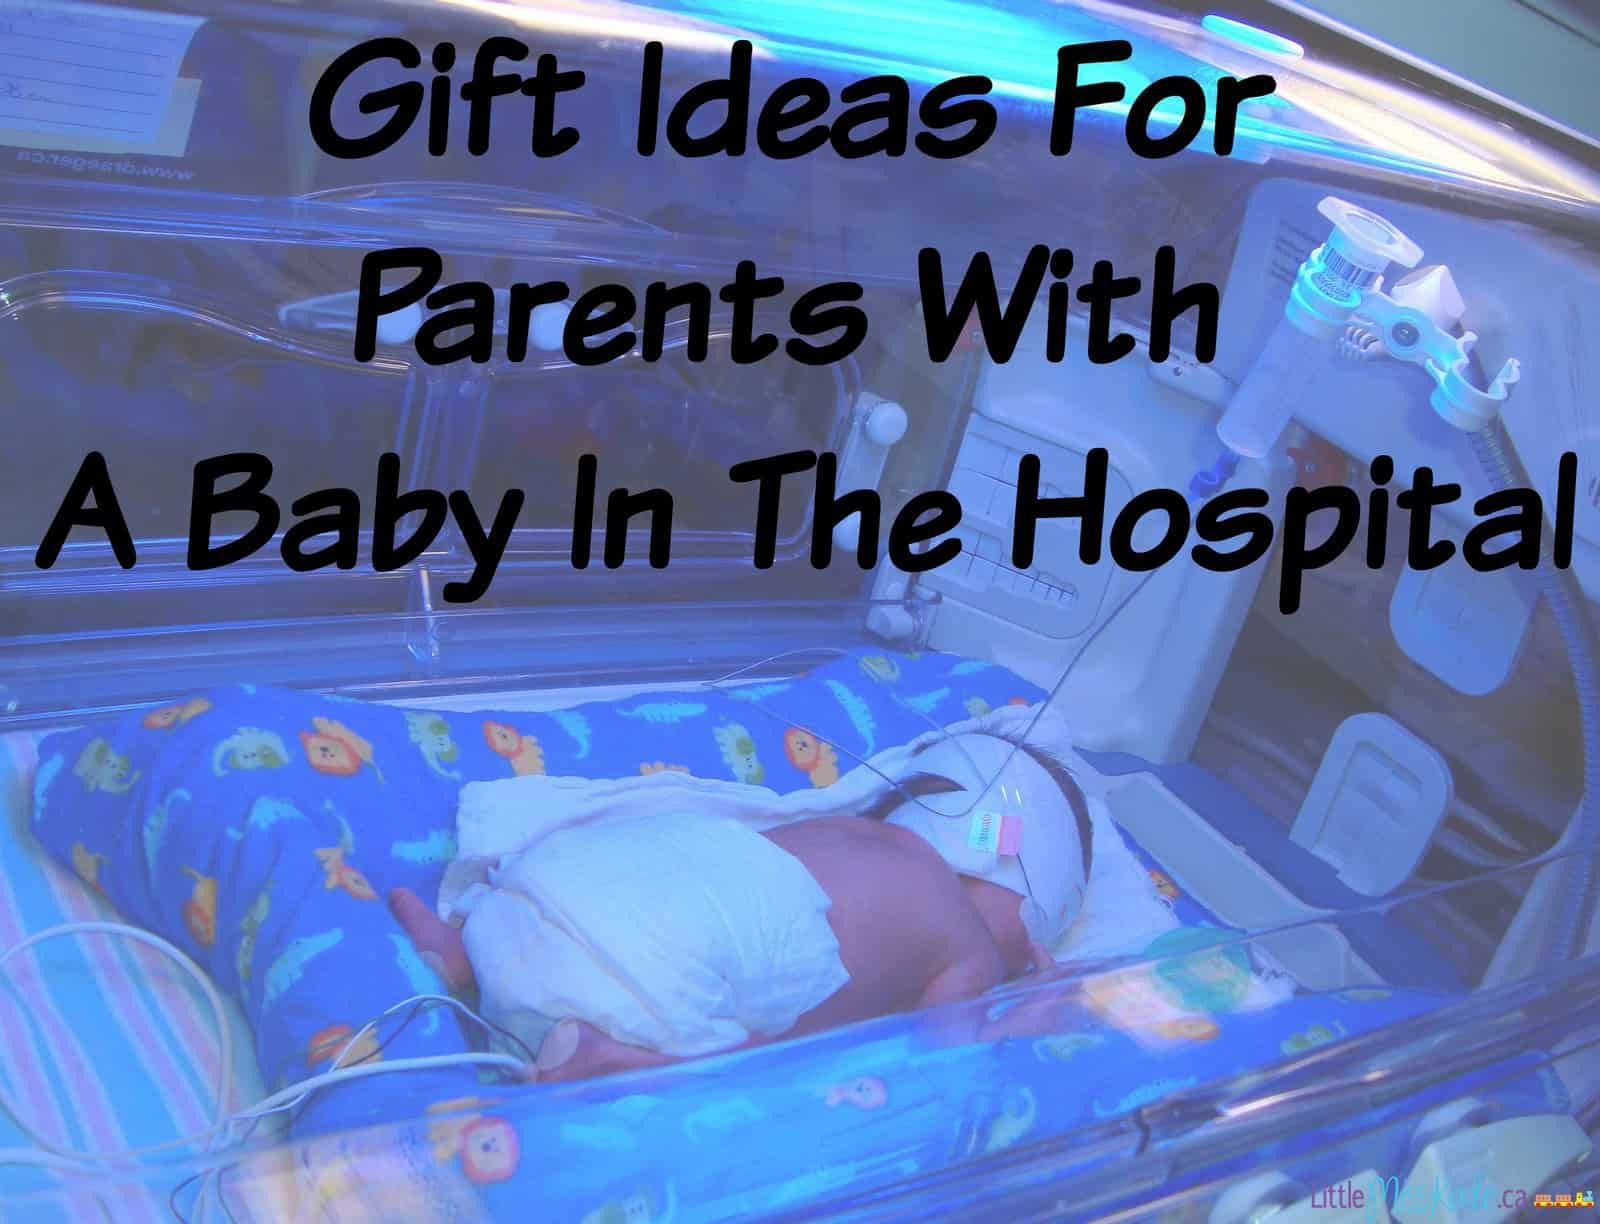 New Baby Gift Ideas For Parents
 Gift Ideas For Parents With A Baby In The Hospital